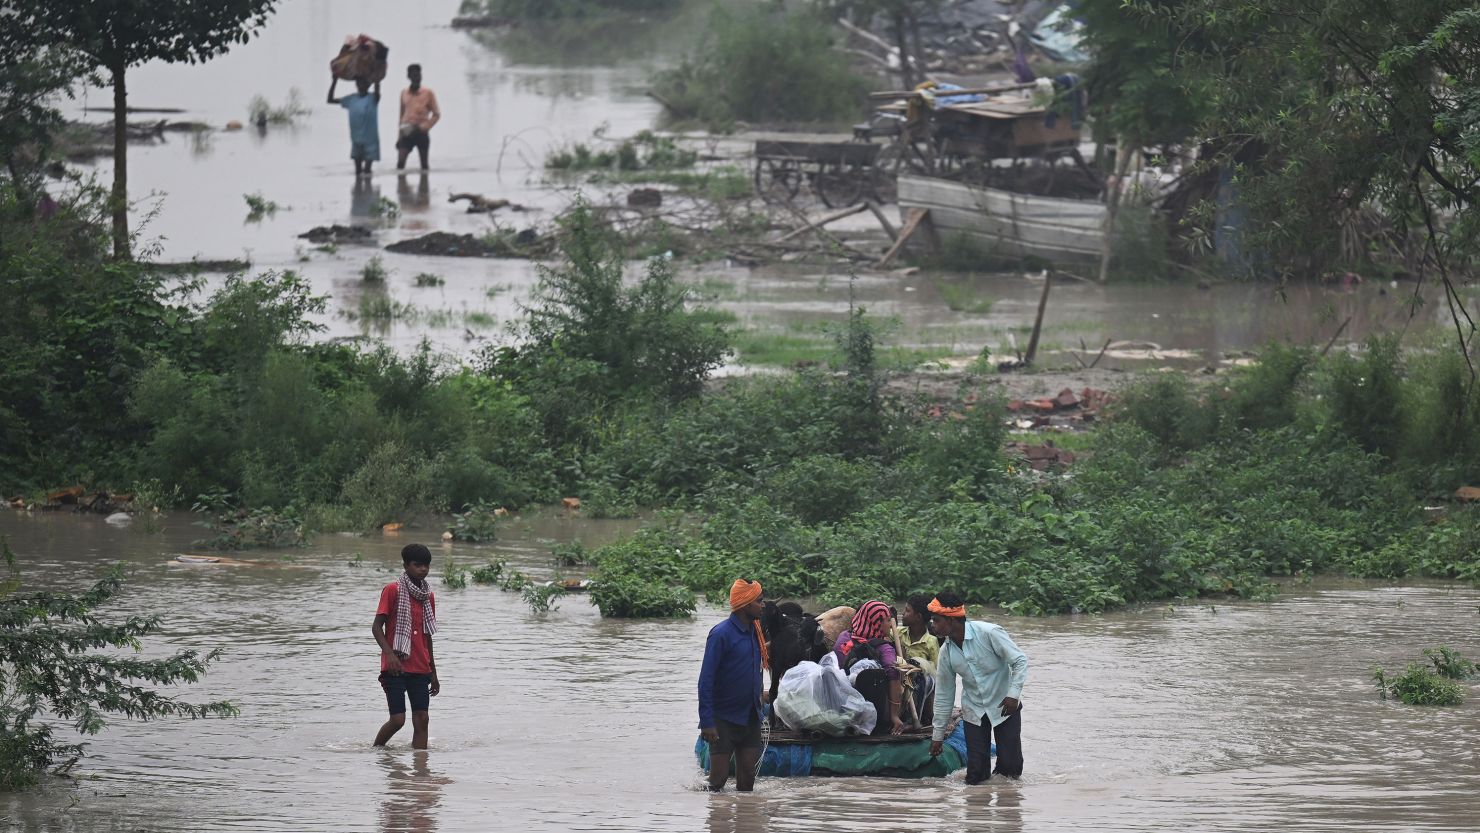 People use a makeshift raft to relocate cattle from a flooded area near the Yamuna River after it overflowed due to monsoon rains in New Delhi on July 11.